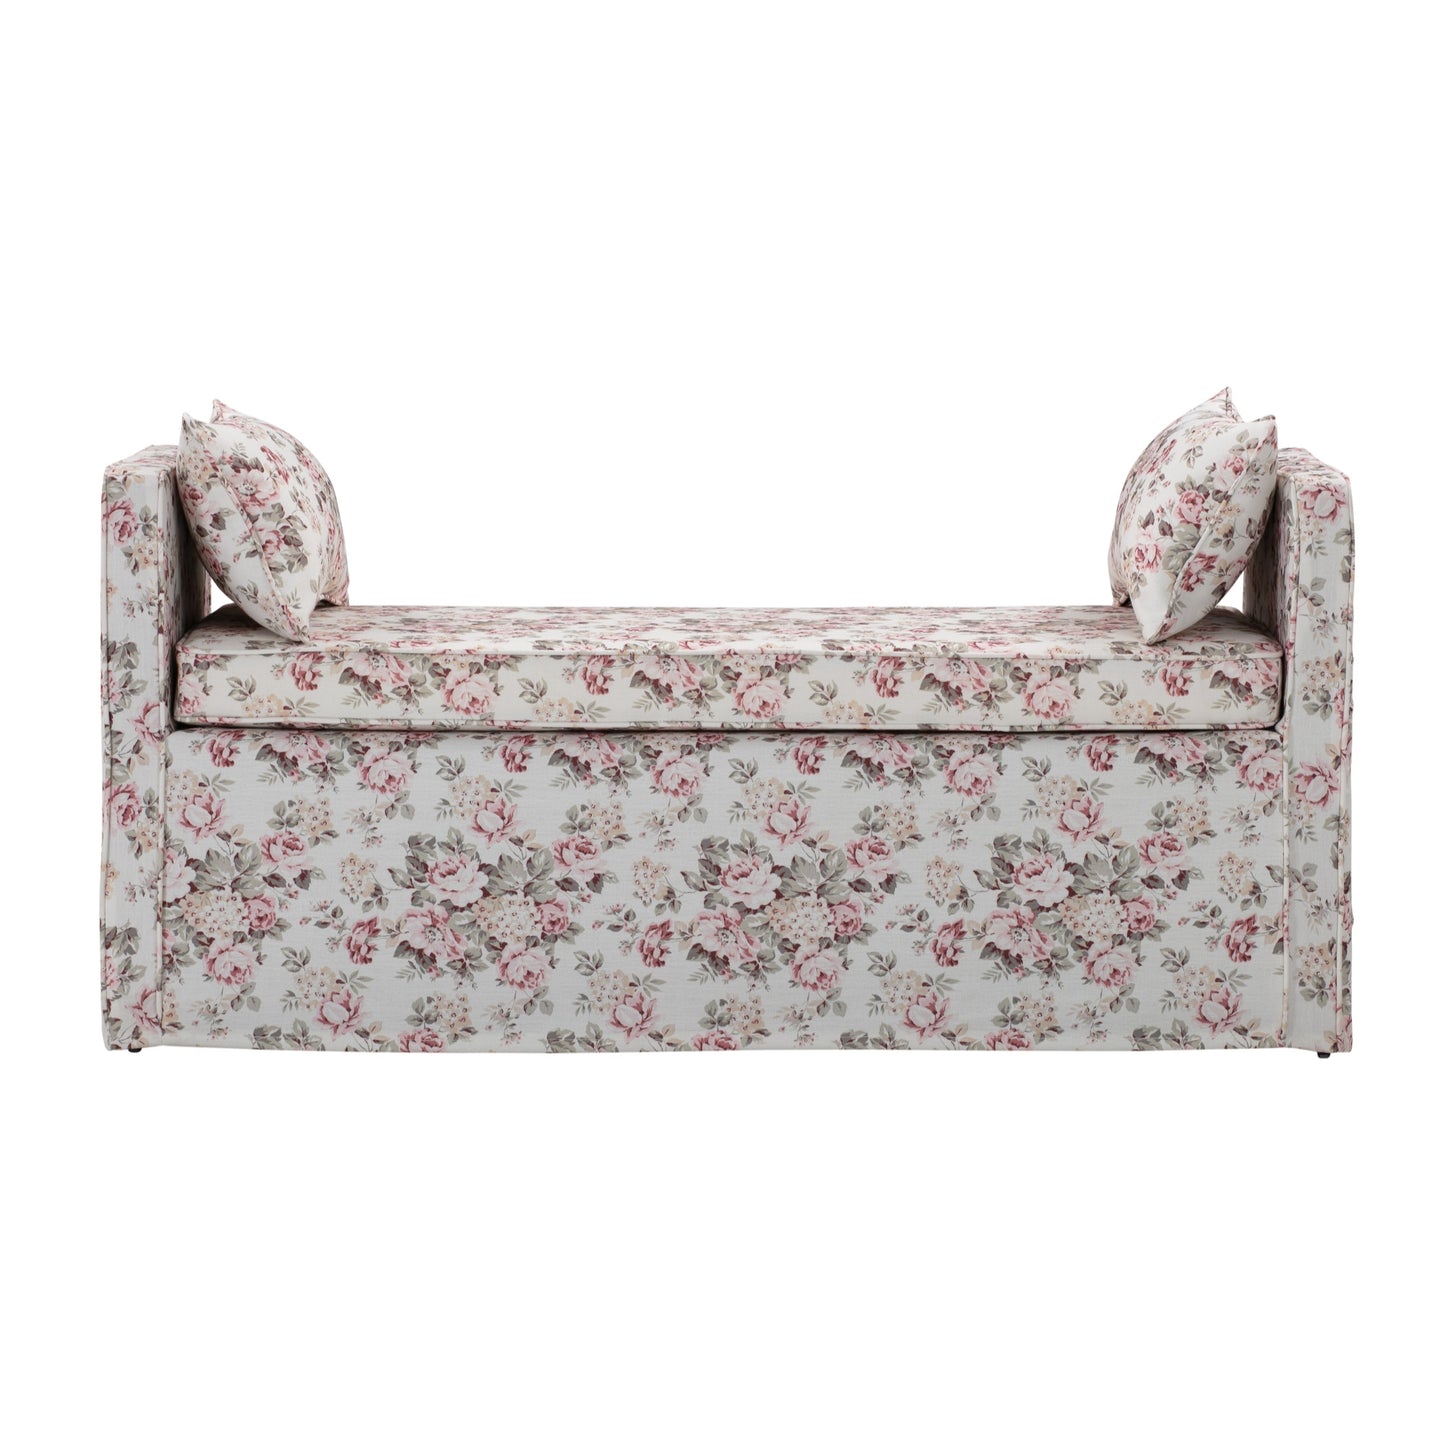 53" Red And Black Upholstered Linen Floral Bench By Homeroots